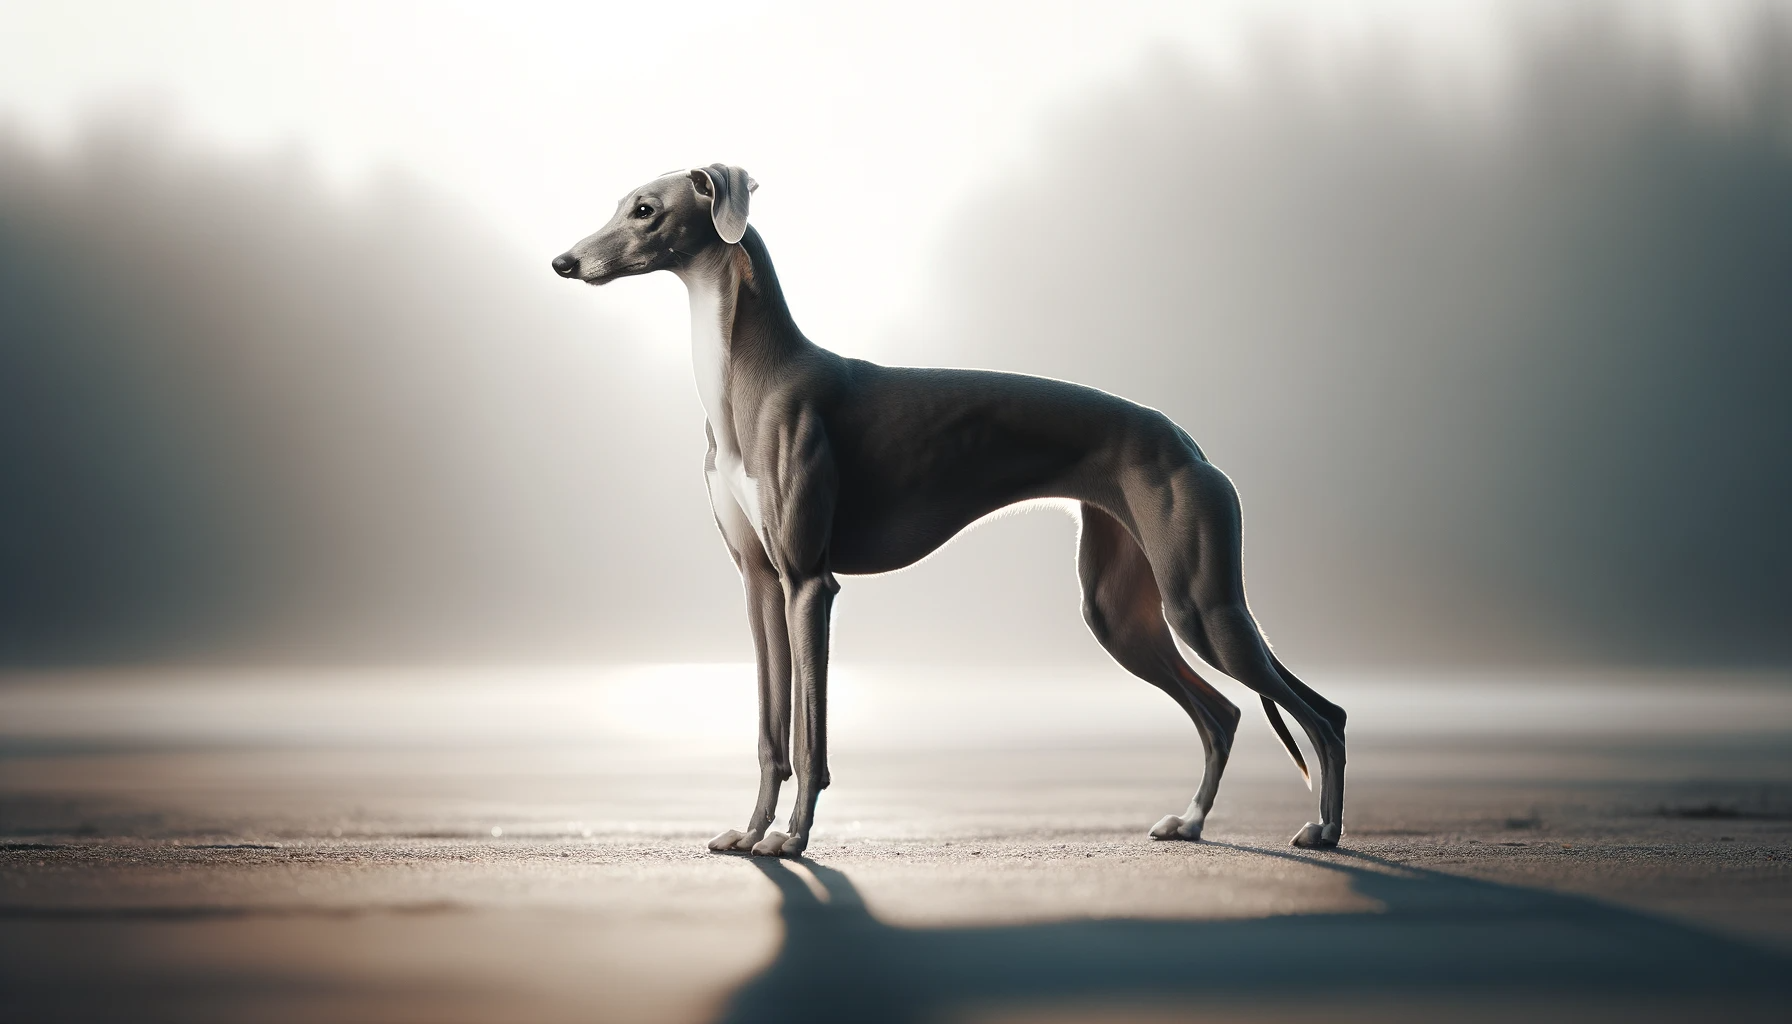 Greyador captured in a stance that highlights its elegant silhouette